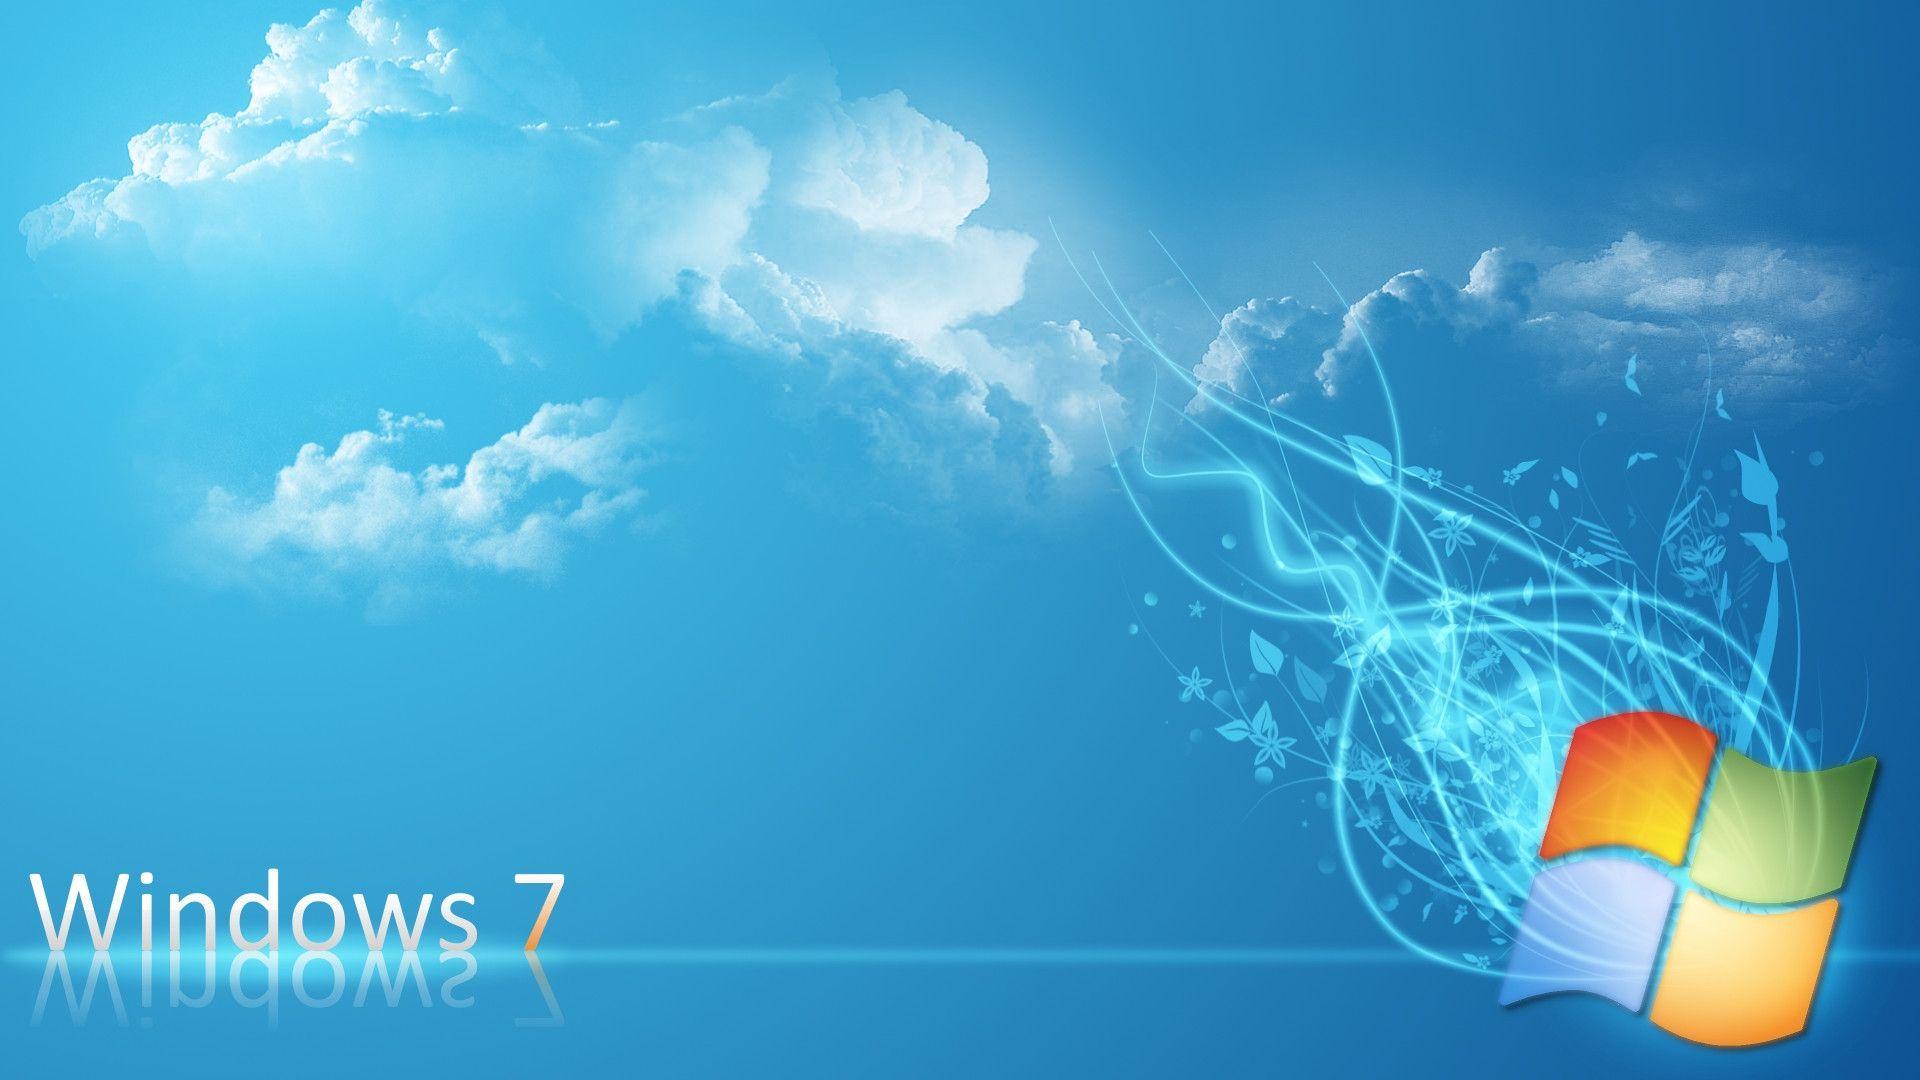 Free HD Windows 7 Wallpaper For Download